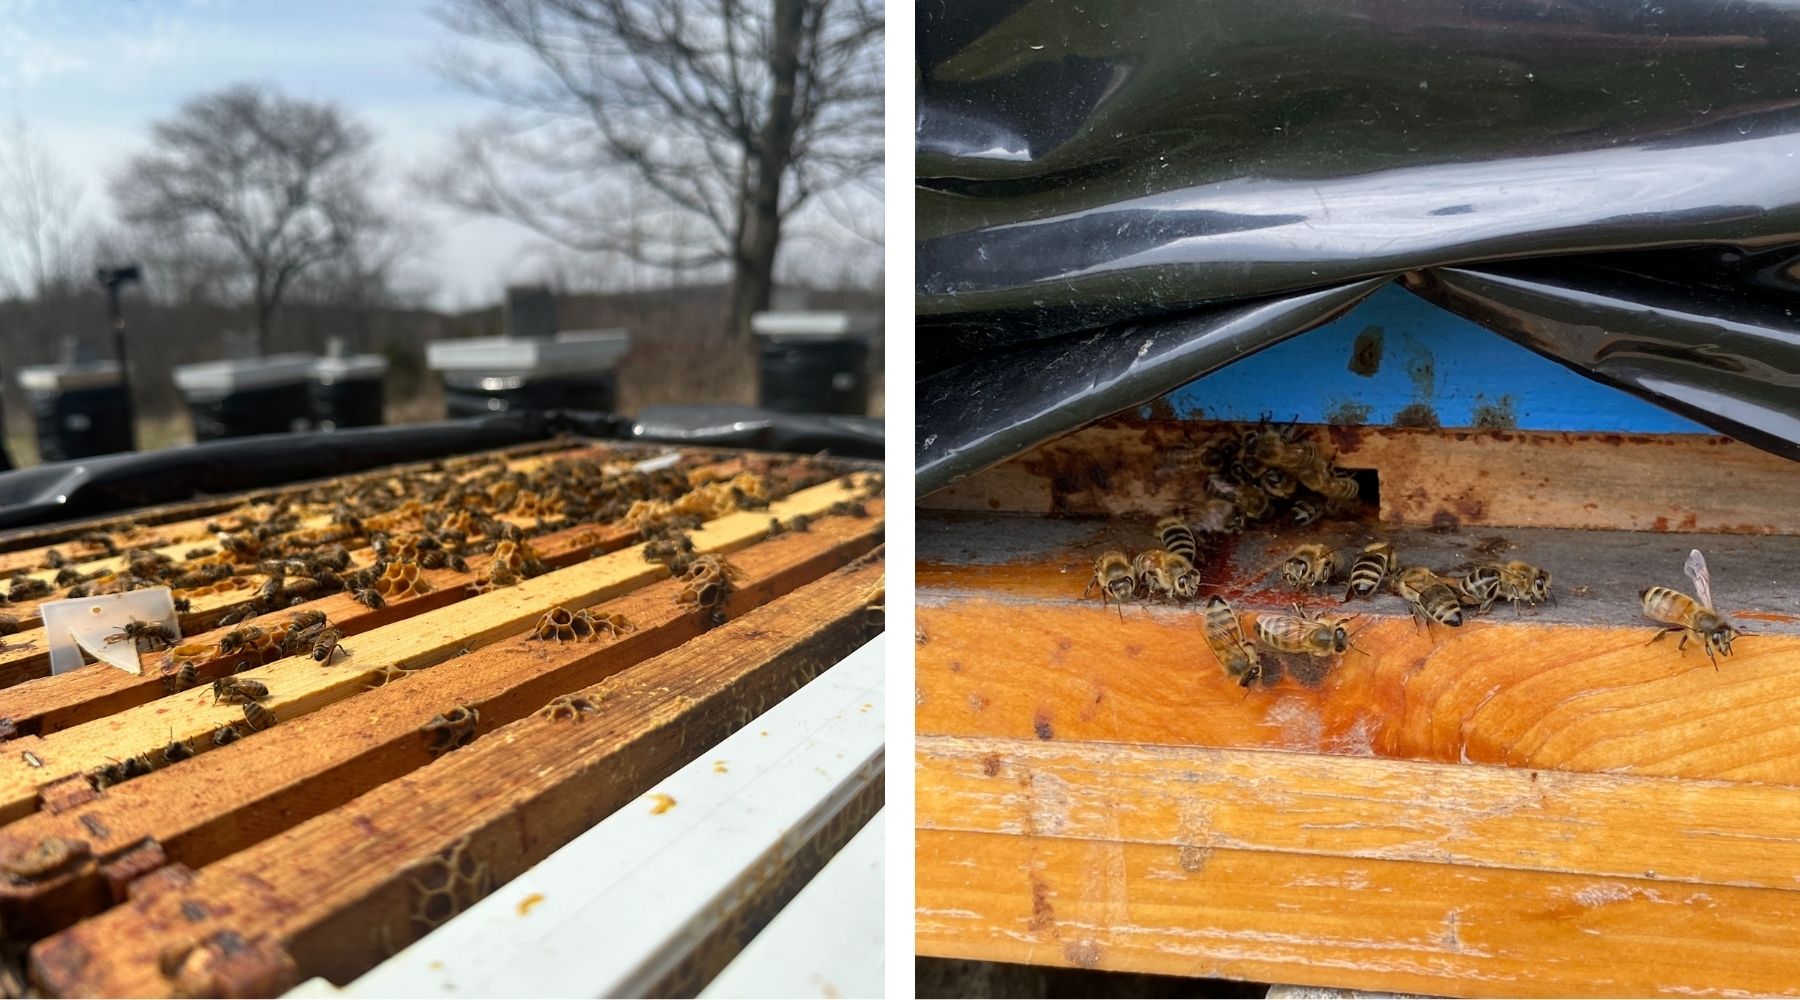 treating honey bees for disease in the spring